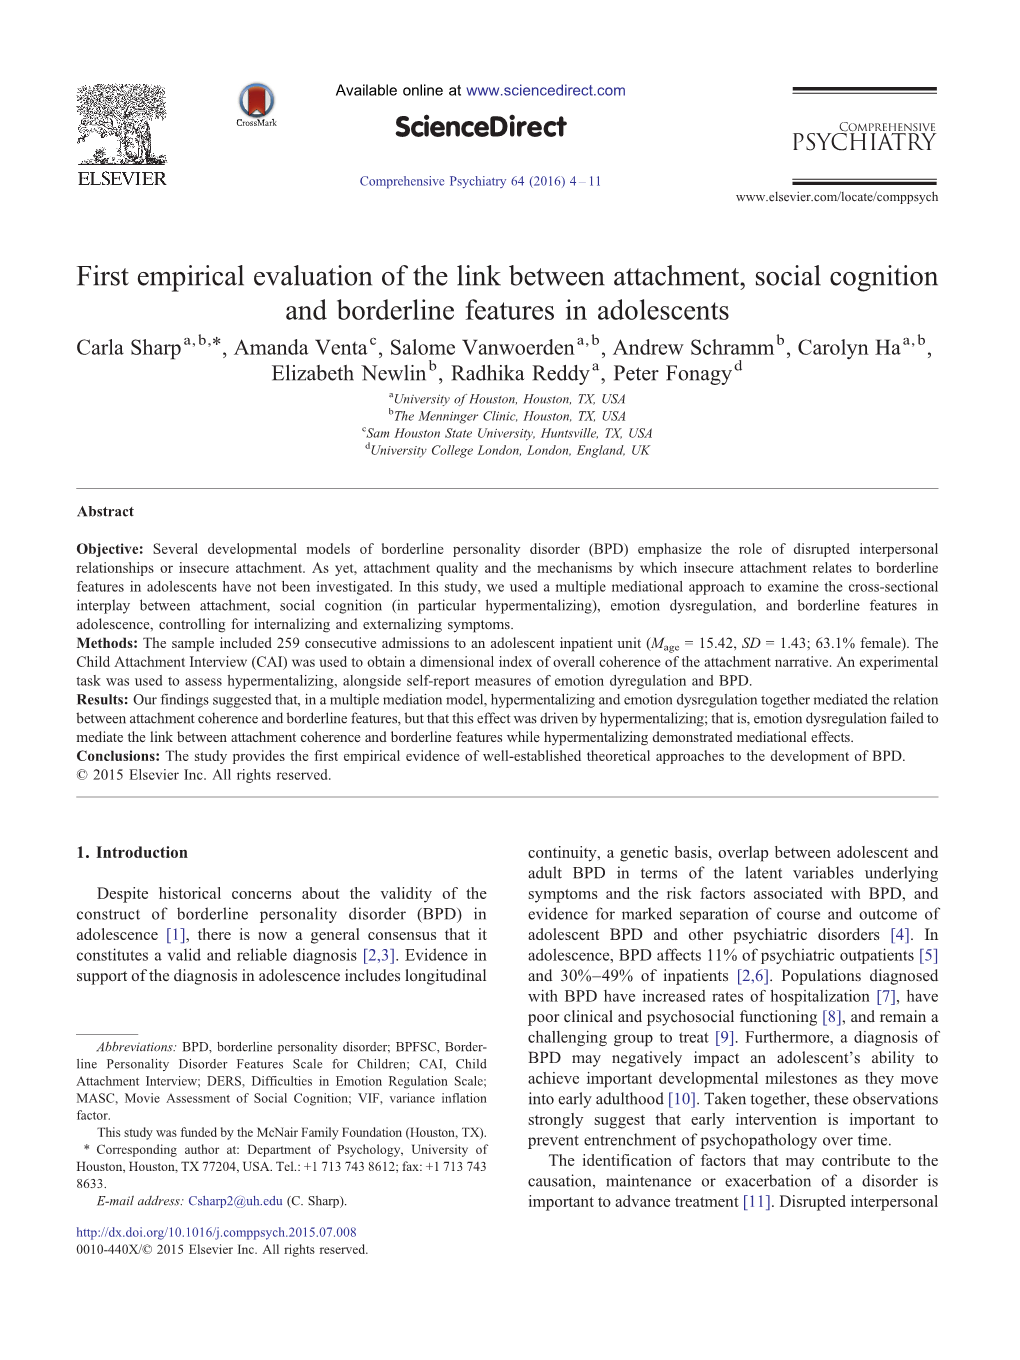 First Empirical Evaluation of the Link Between Attachment, Social